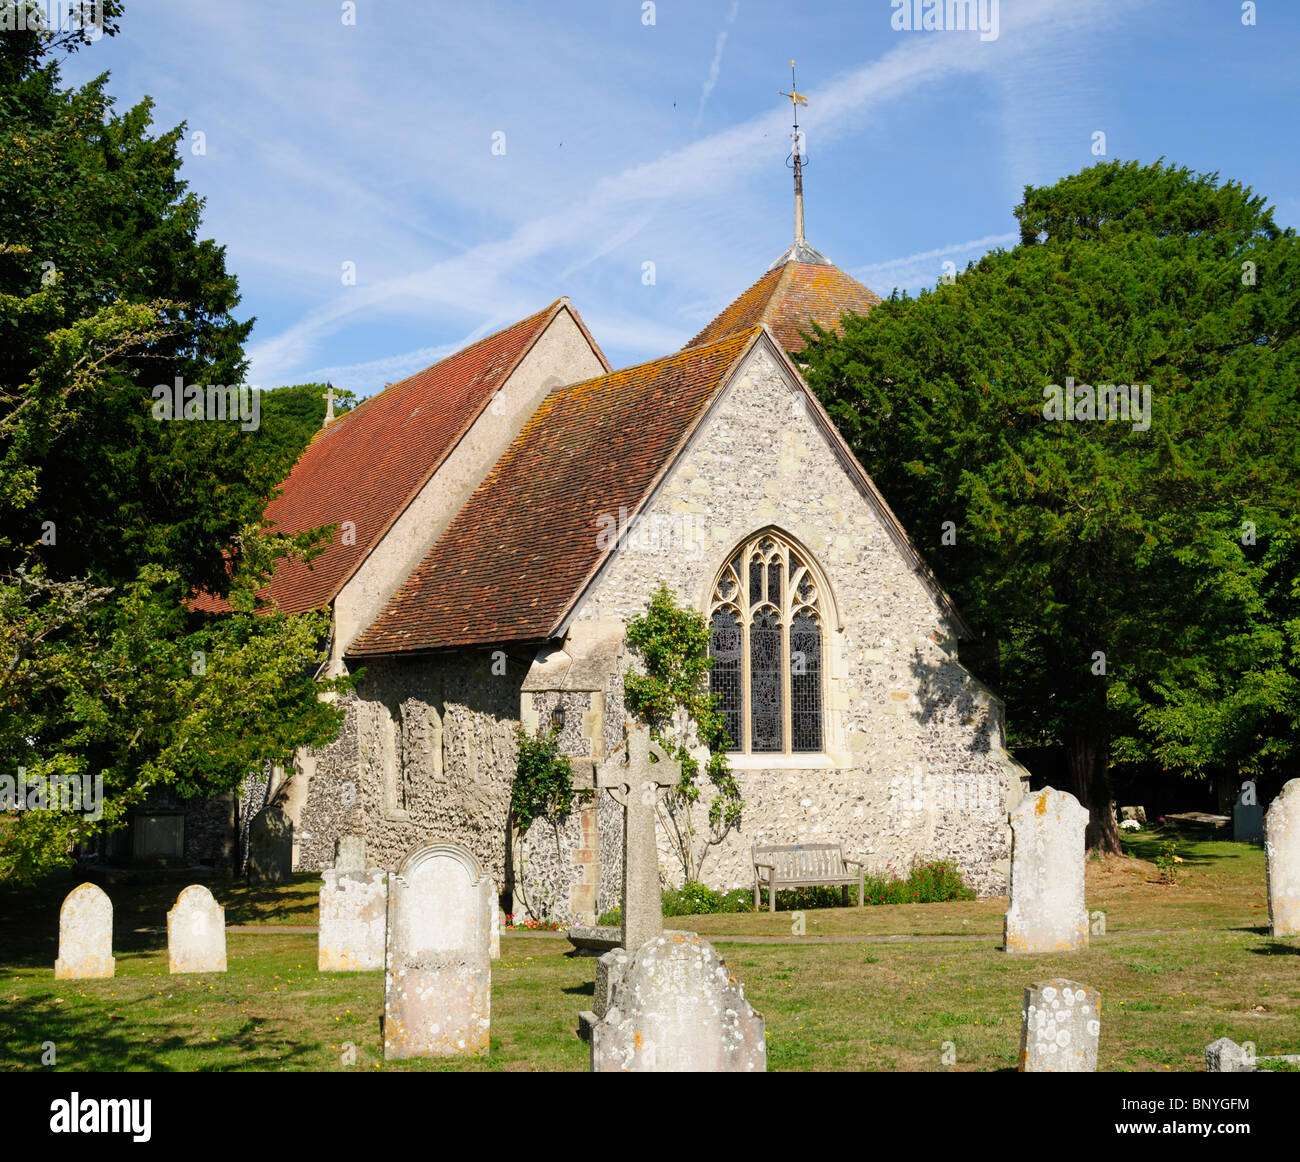 St Simon and St Jude church in East Dean, Sussex, England. Stock Photo